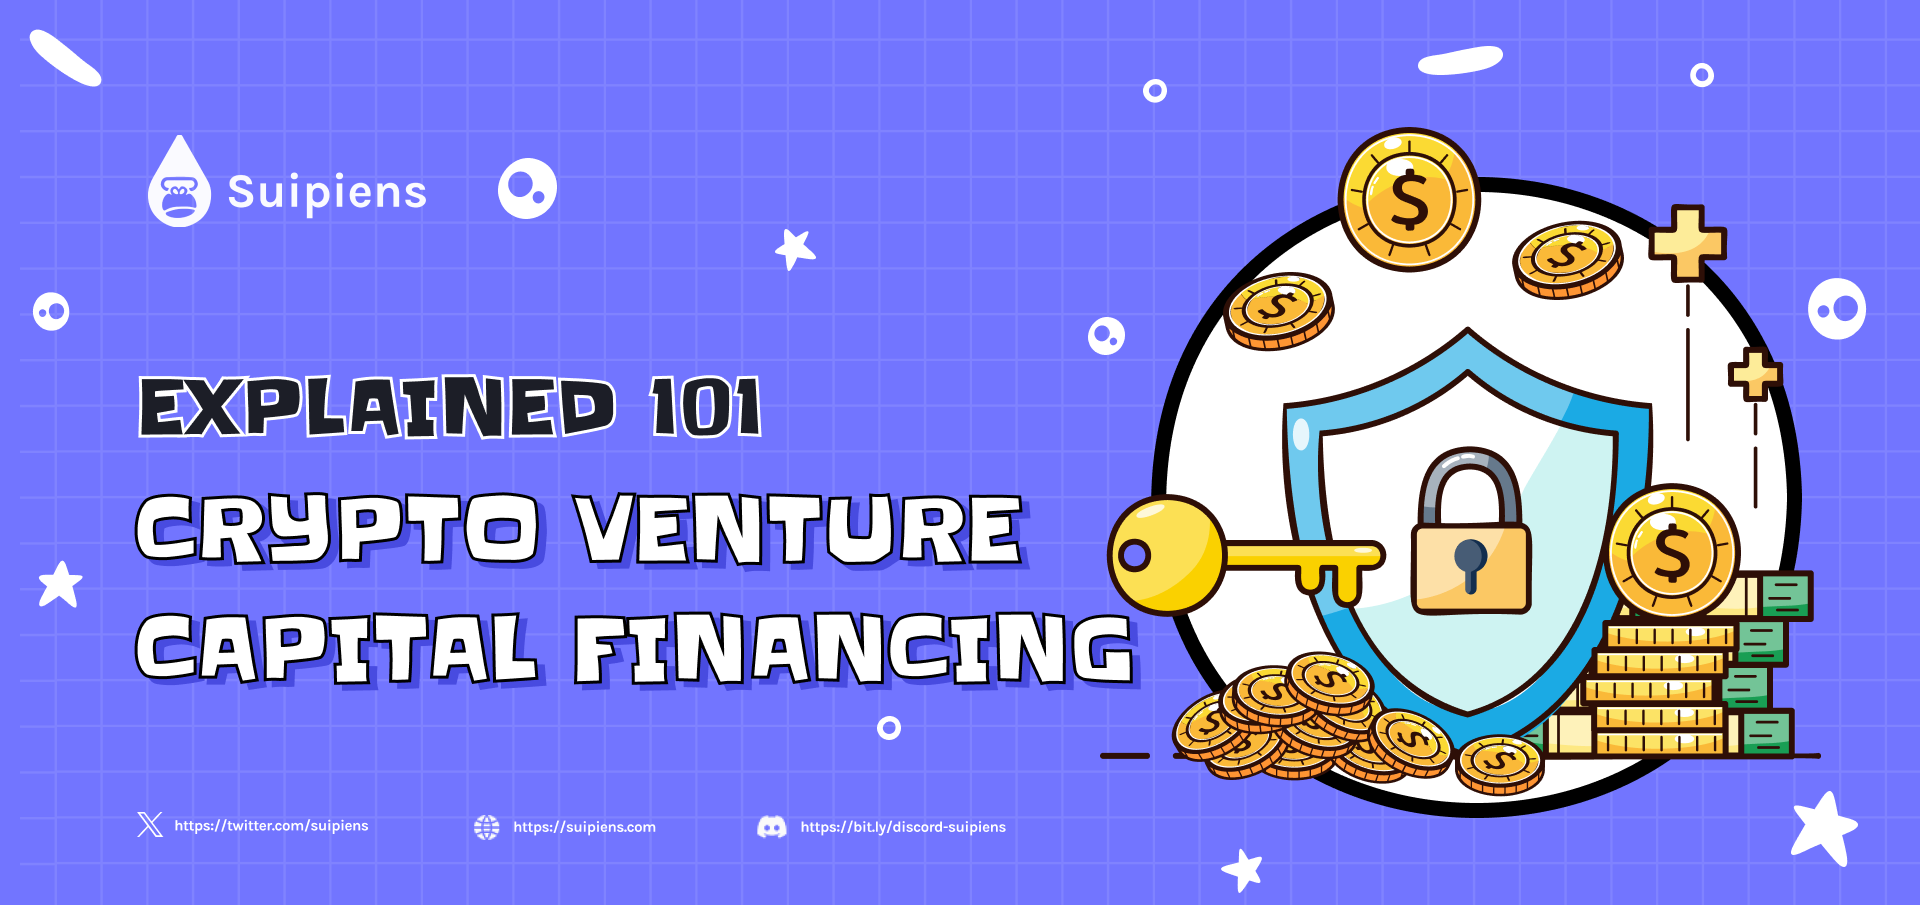 Explained 101: Crypto Venture Capital Financing